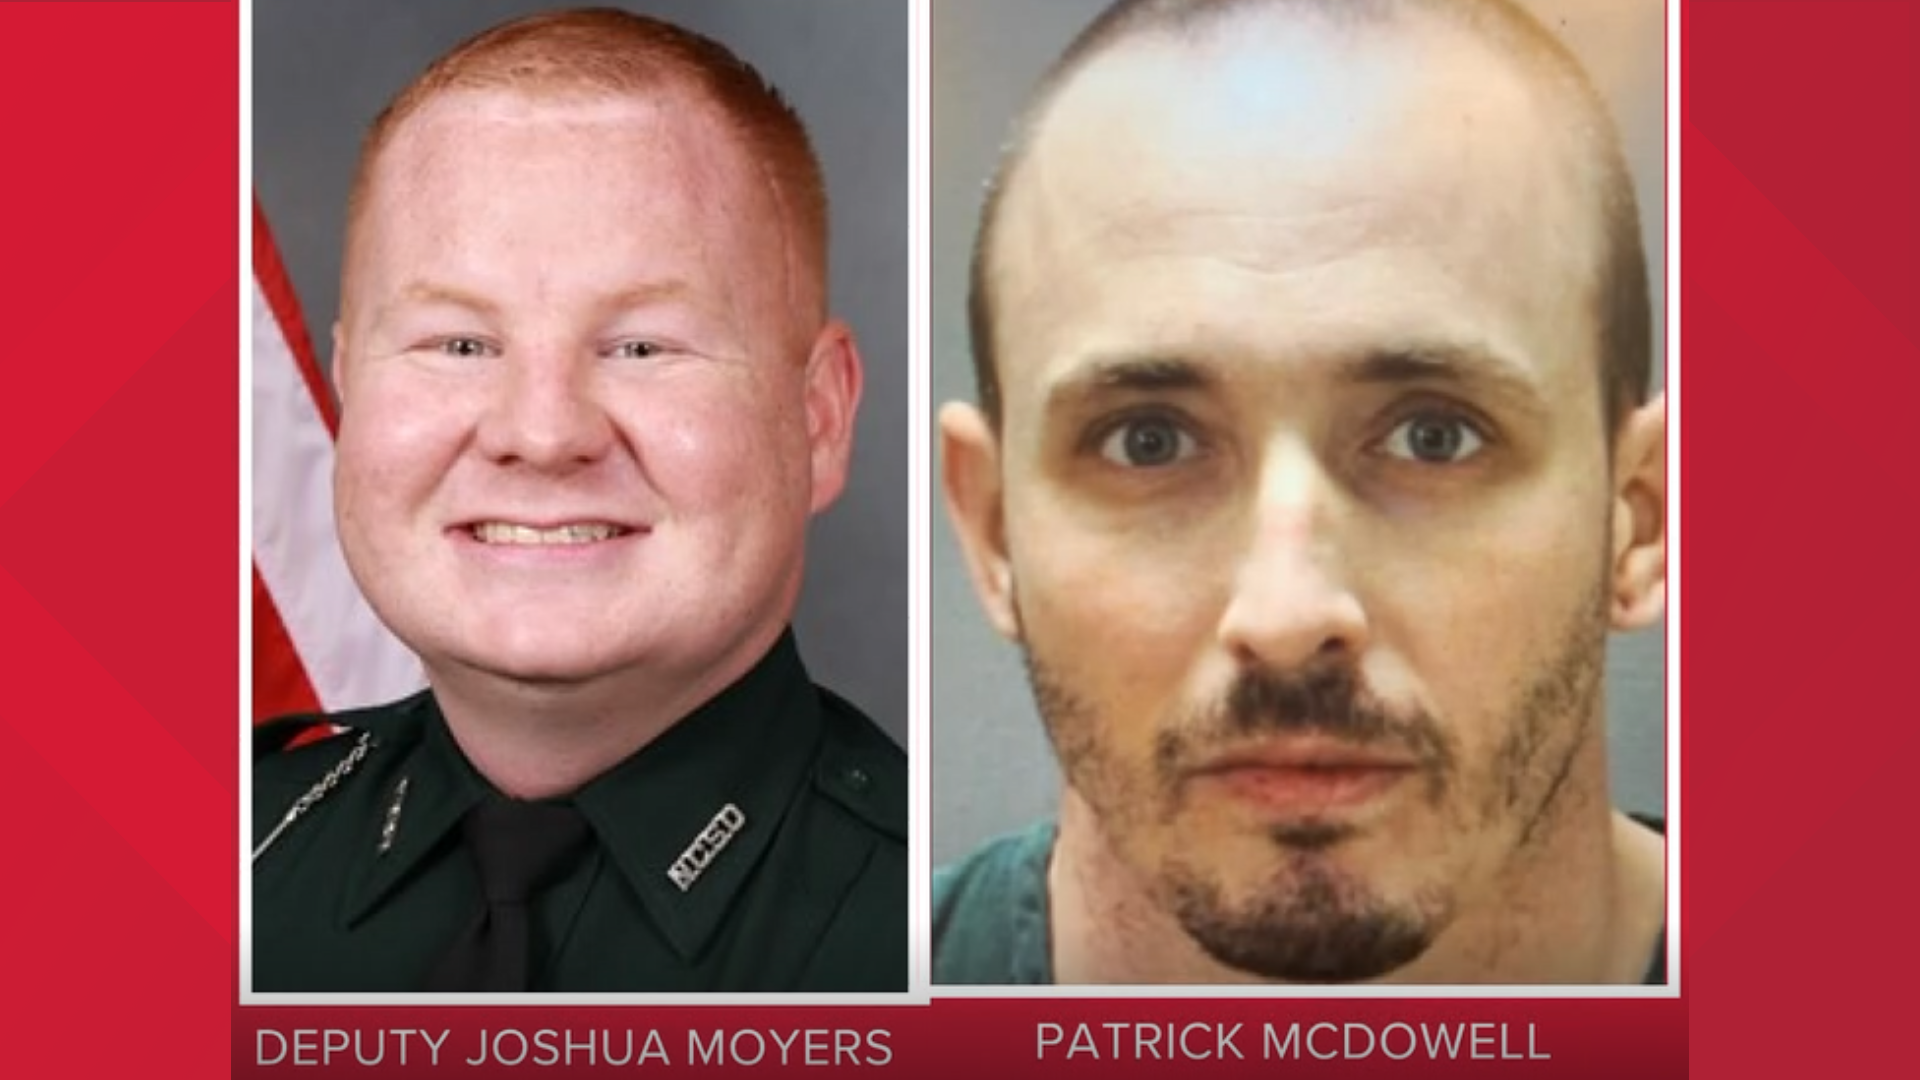 First Coast News' Renata Di Gregorio gives an update in the death penalty case of Patrick McDowell. He killed Deputy Joshua Moyers in September 2021.